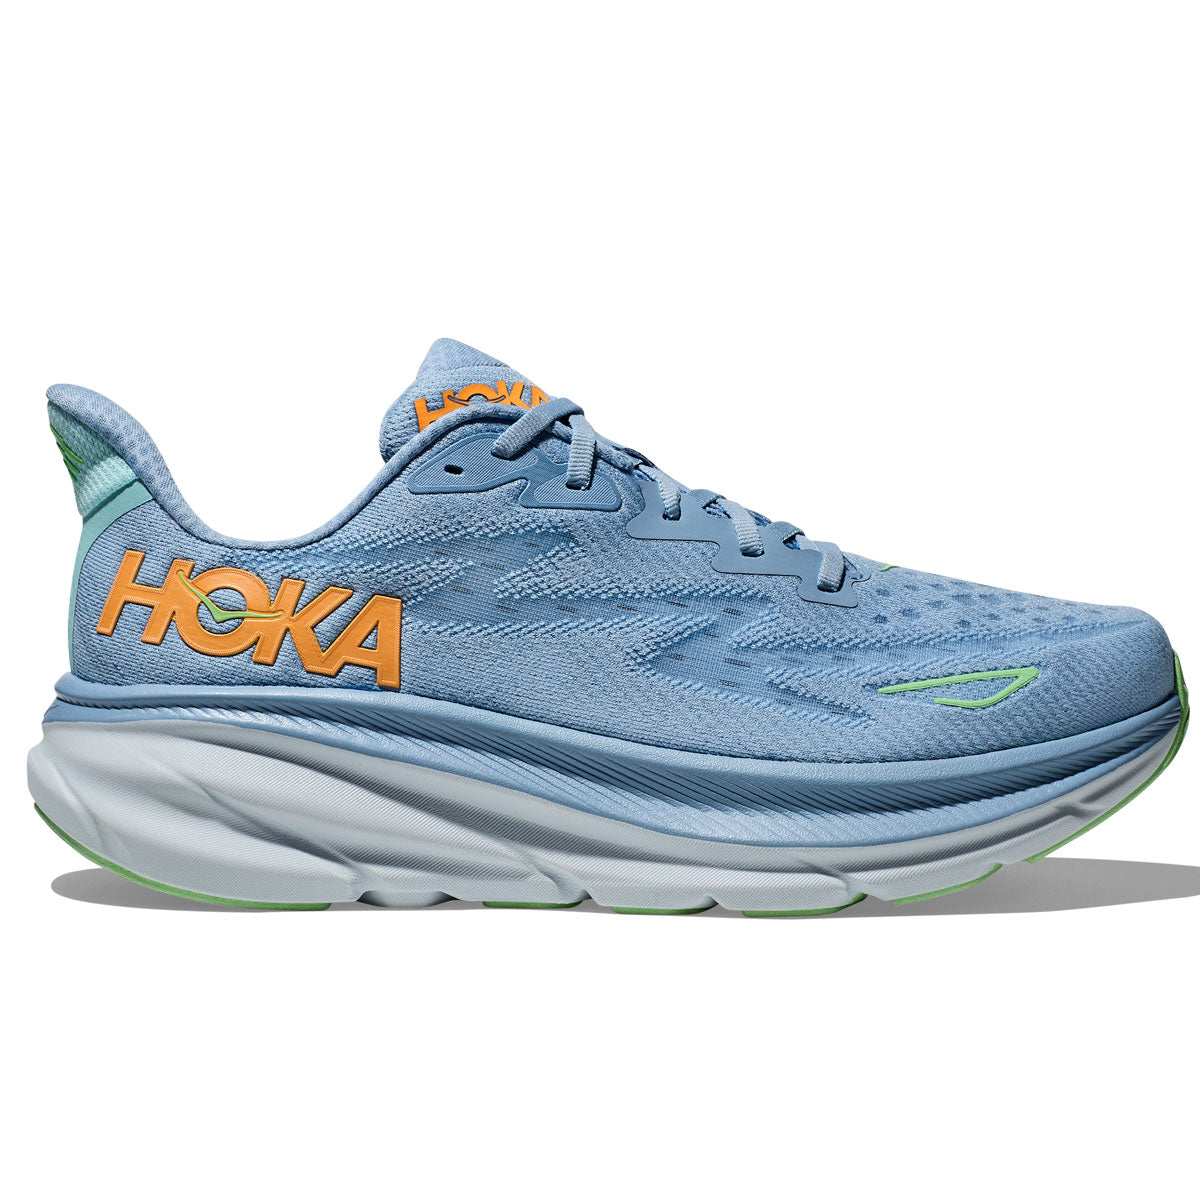 Hoka One One Clifton 9 Wide Fit Running Shoes - Mens - Dusk/Illusion